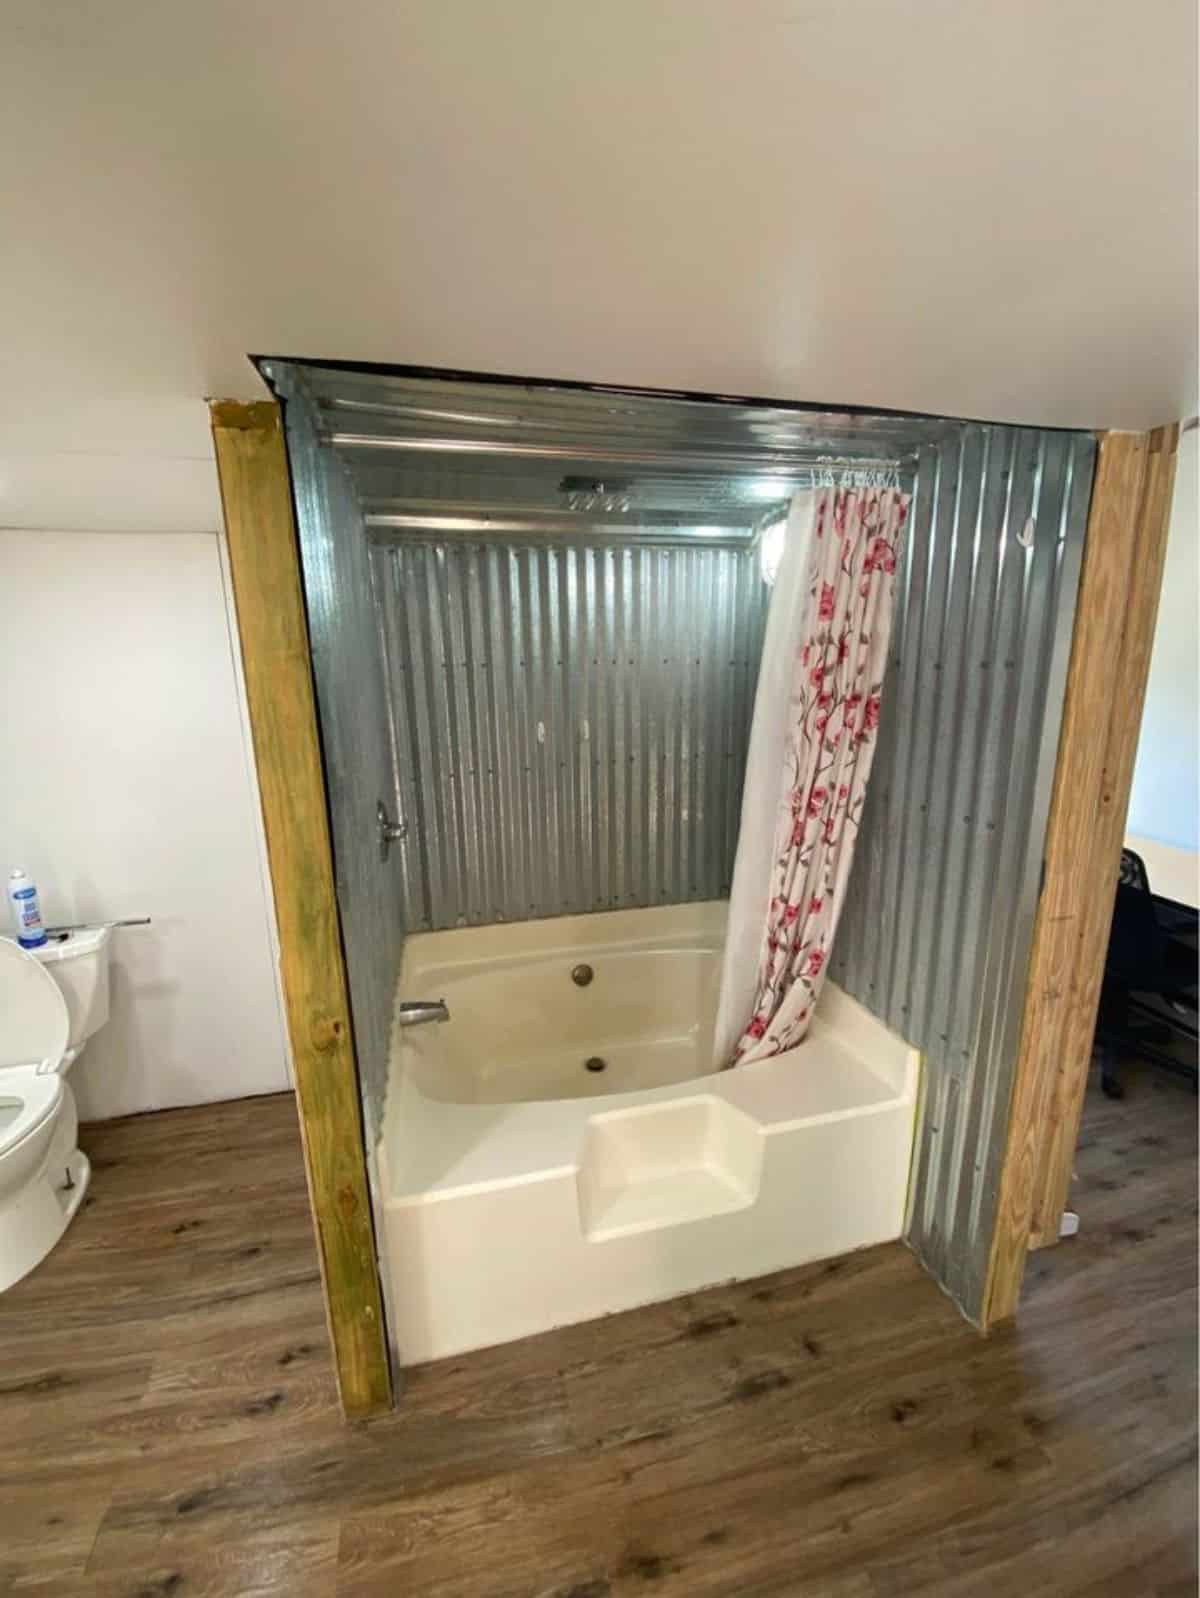 Bathtub in bathroom of 40’ shed converted tiny home